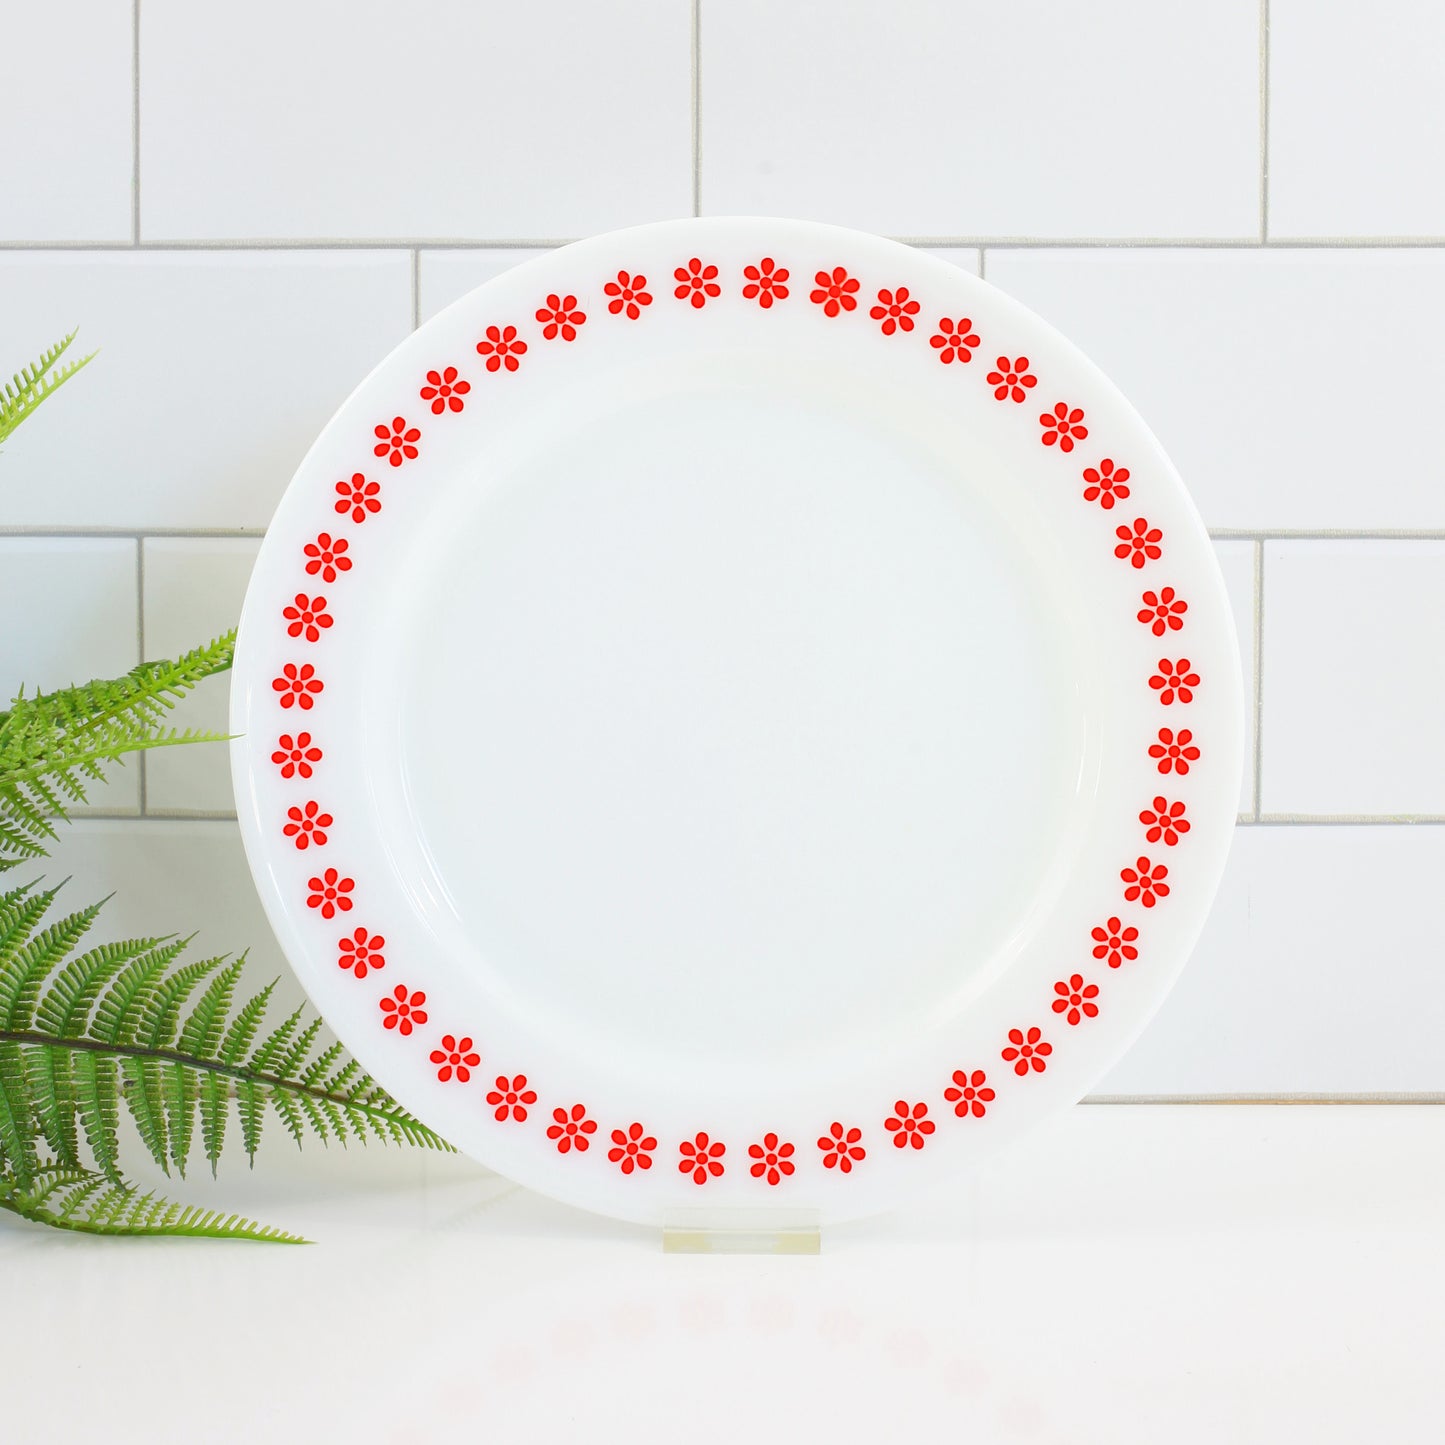 SOLD - Vintage Pyrex Friendship Red & White Flower Plate